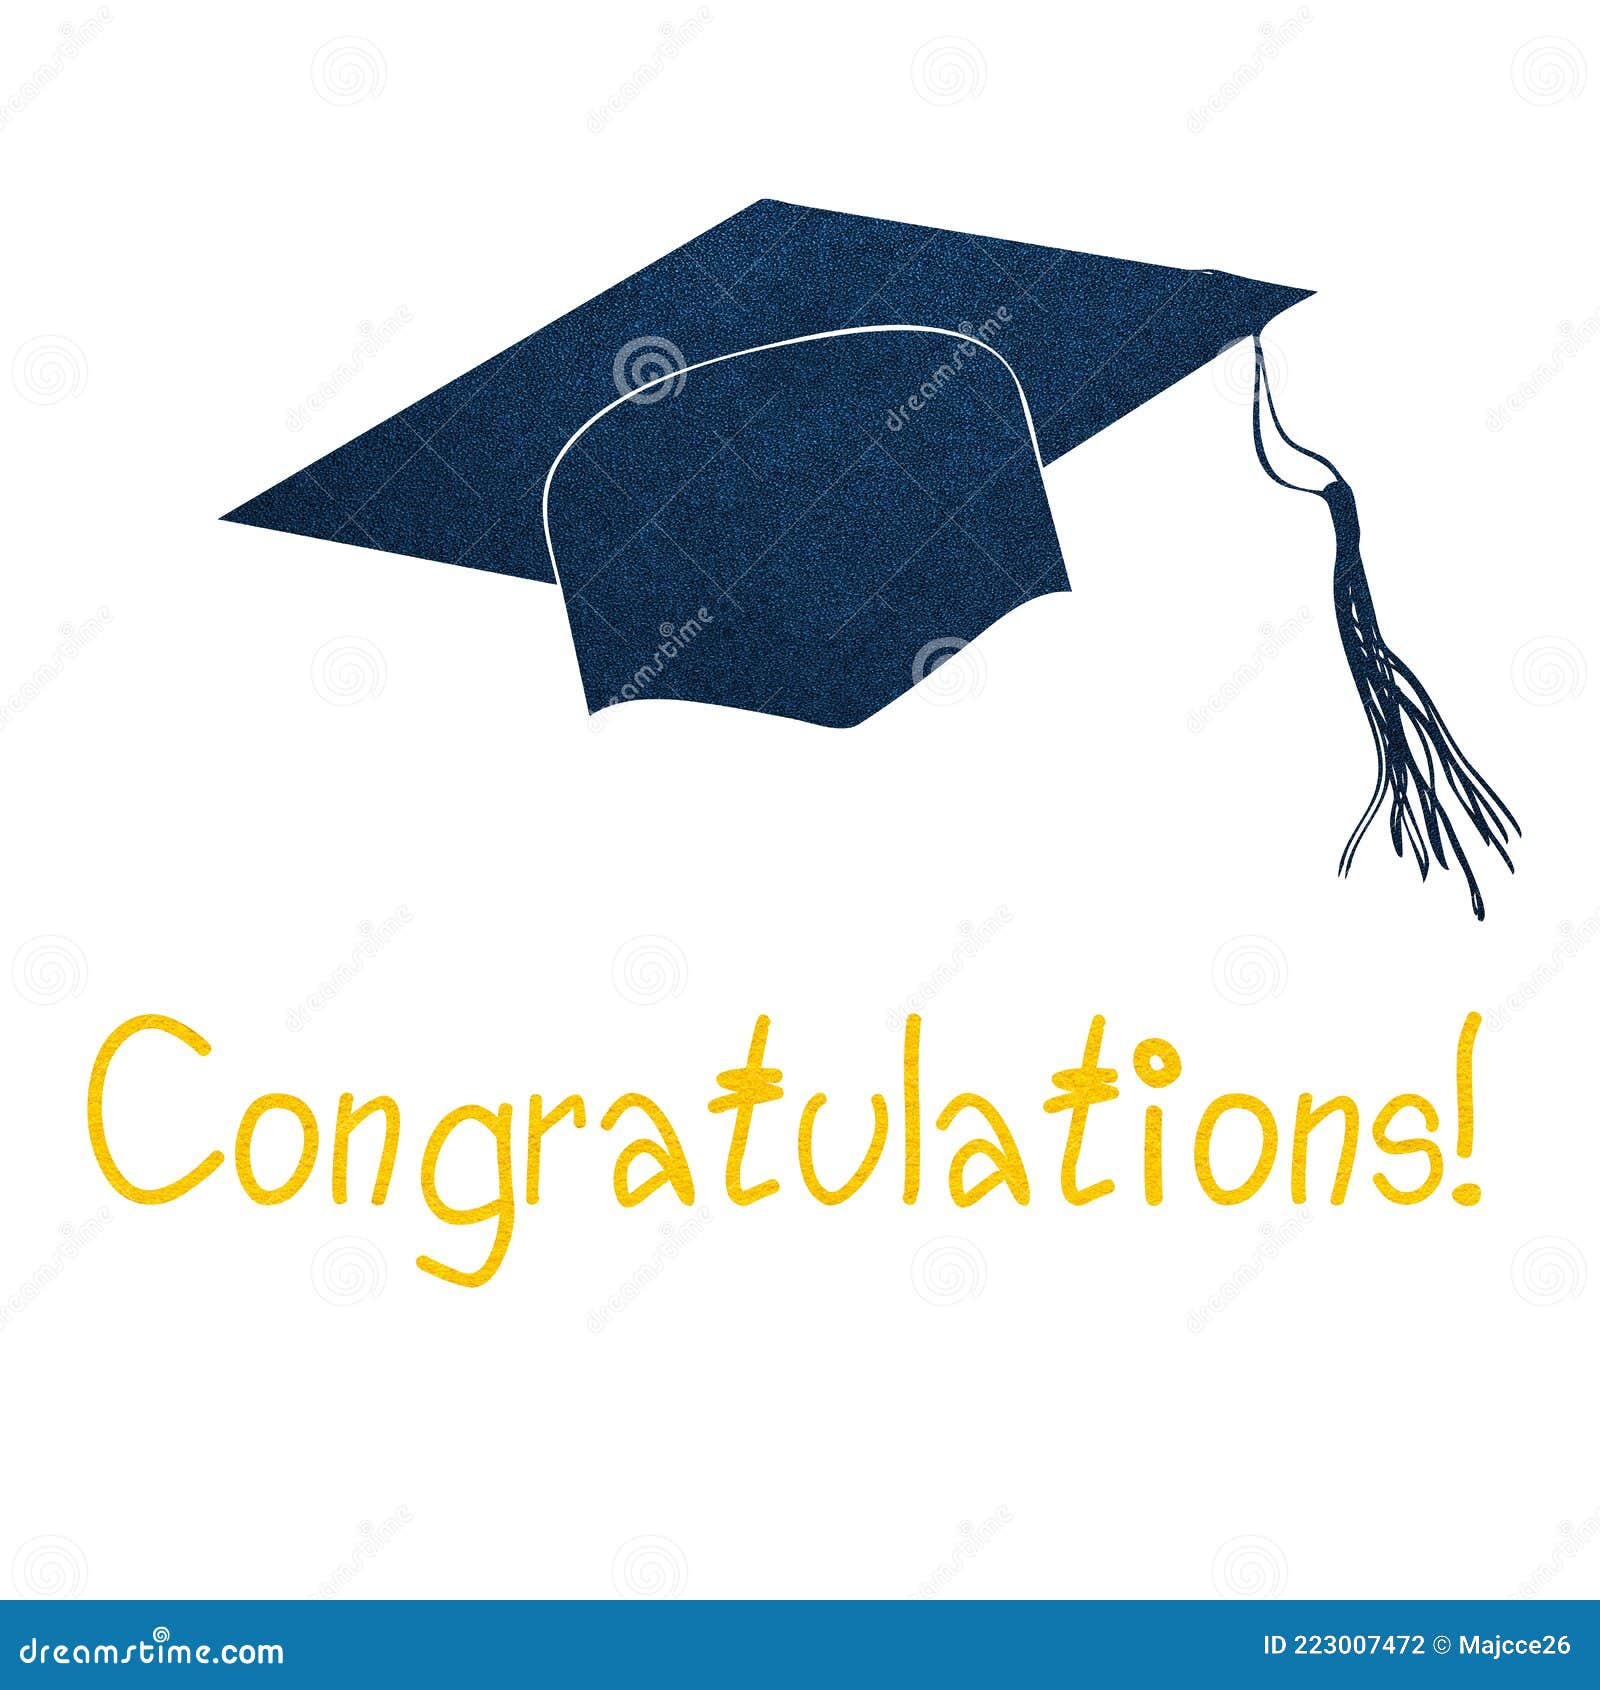 Congratulations Text Letters Hat Graduation Stock Photo - Image of ...